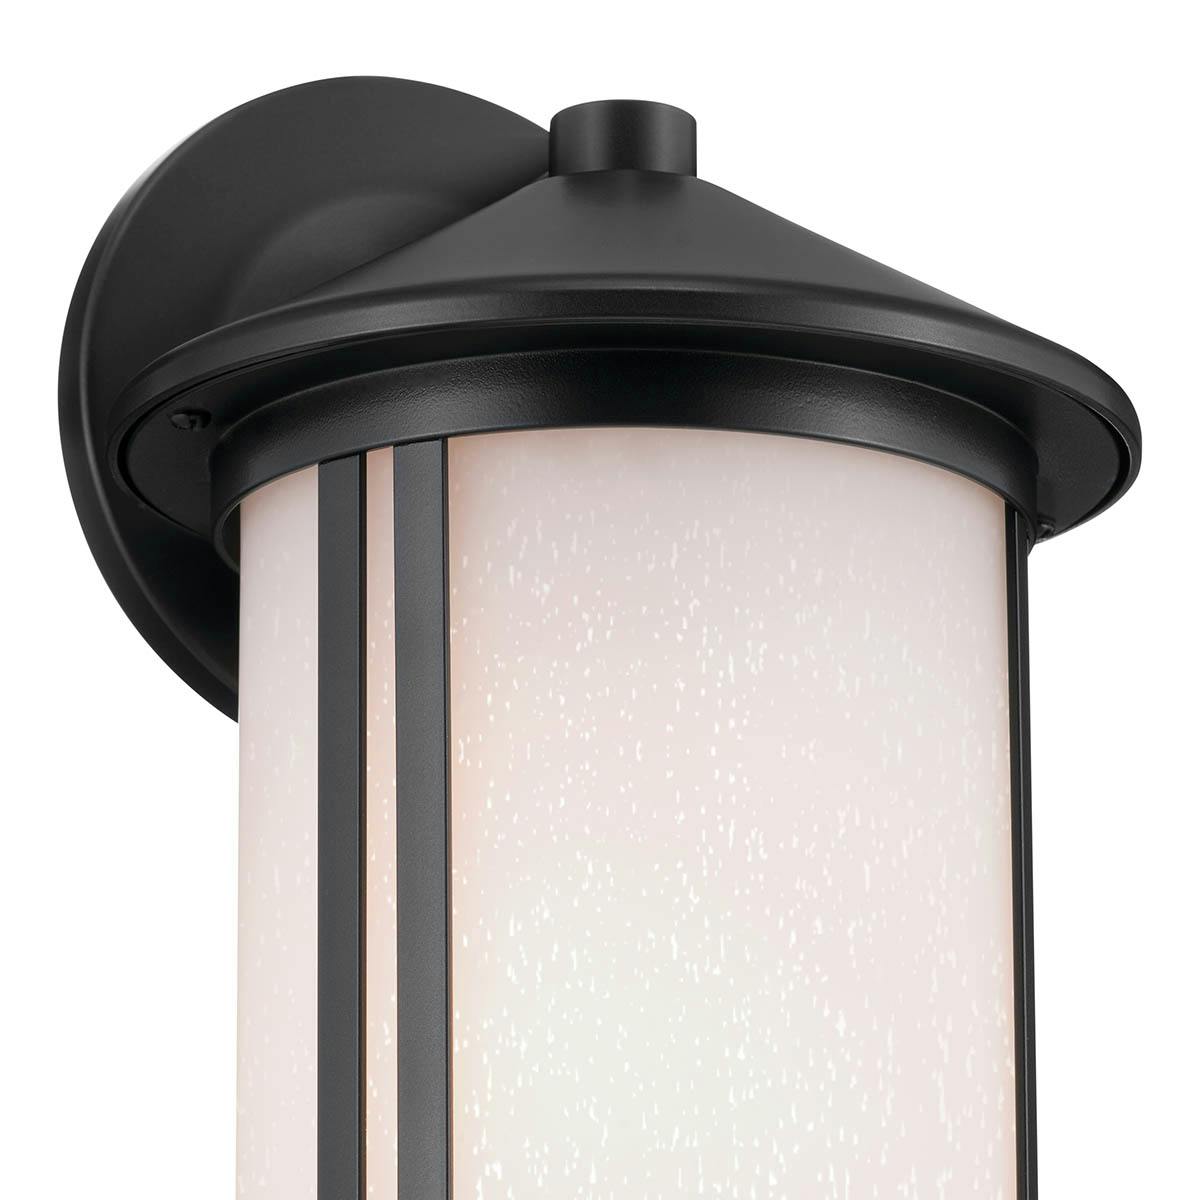 Close up view of the Lombard 12.7" 1 Light Wall Light Black on a white background